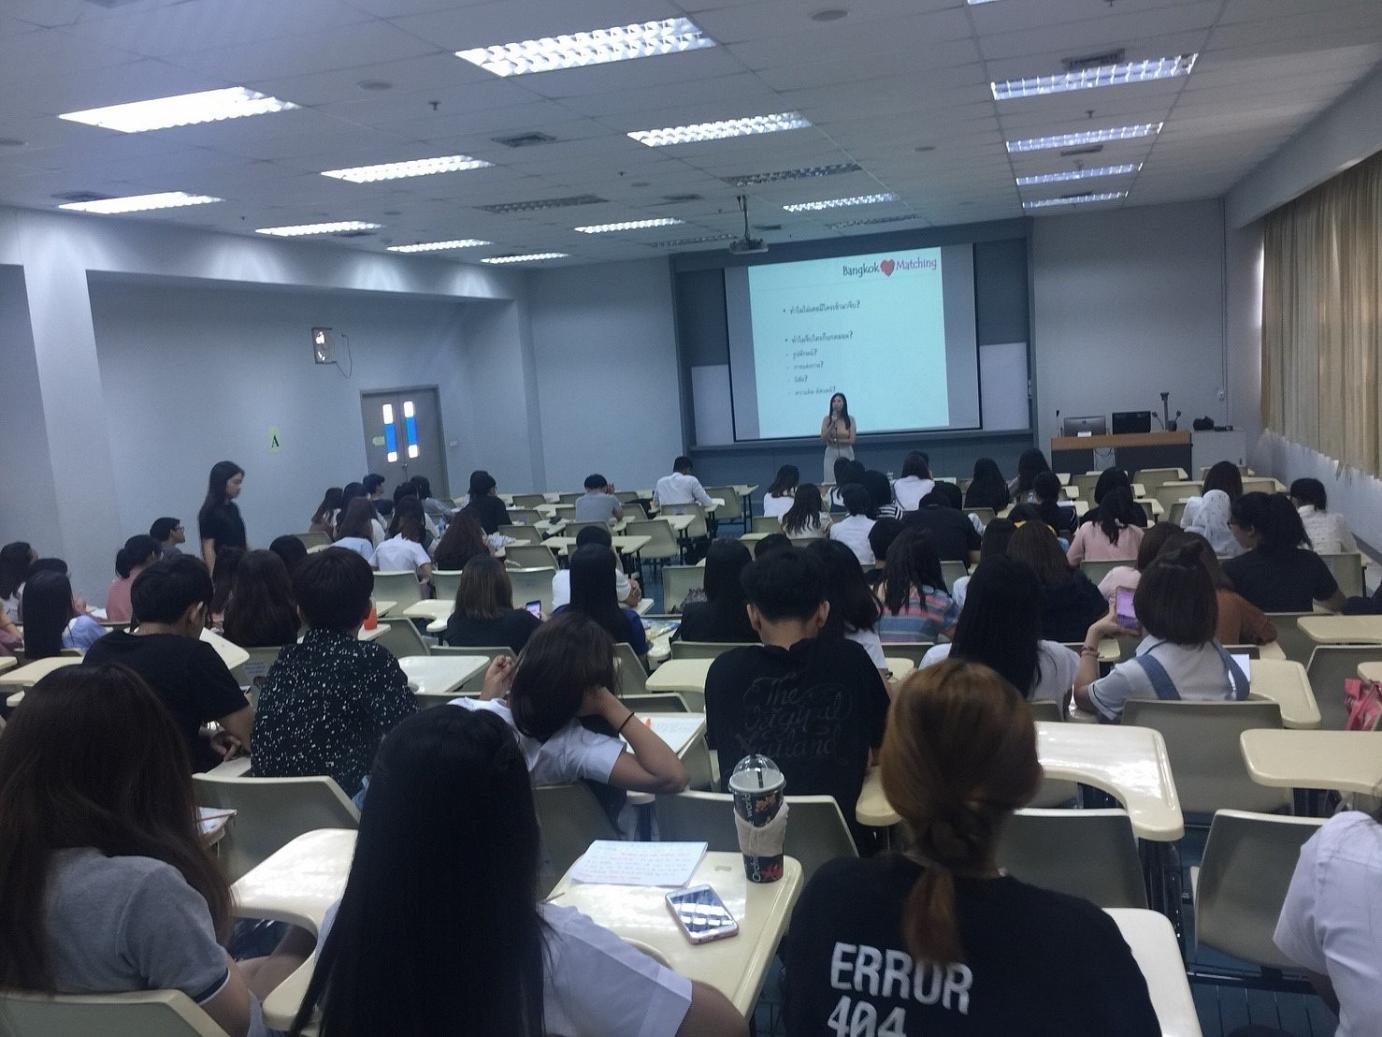 Bangkok Matching's Dating Coach & Matchmaker gave lecture to Thammasart University's Students "Dating in Thailand in the Modern Day".